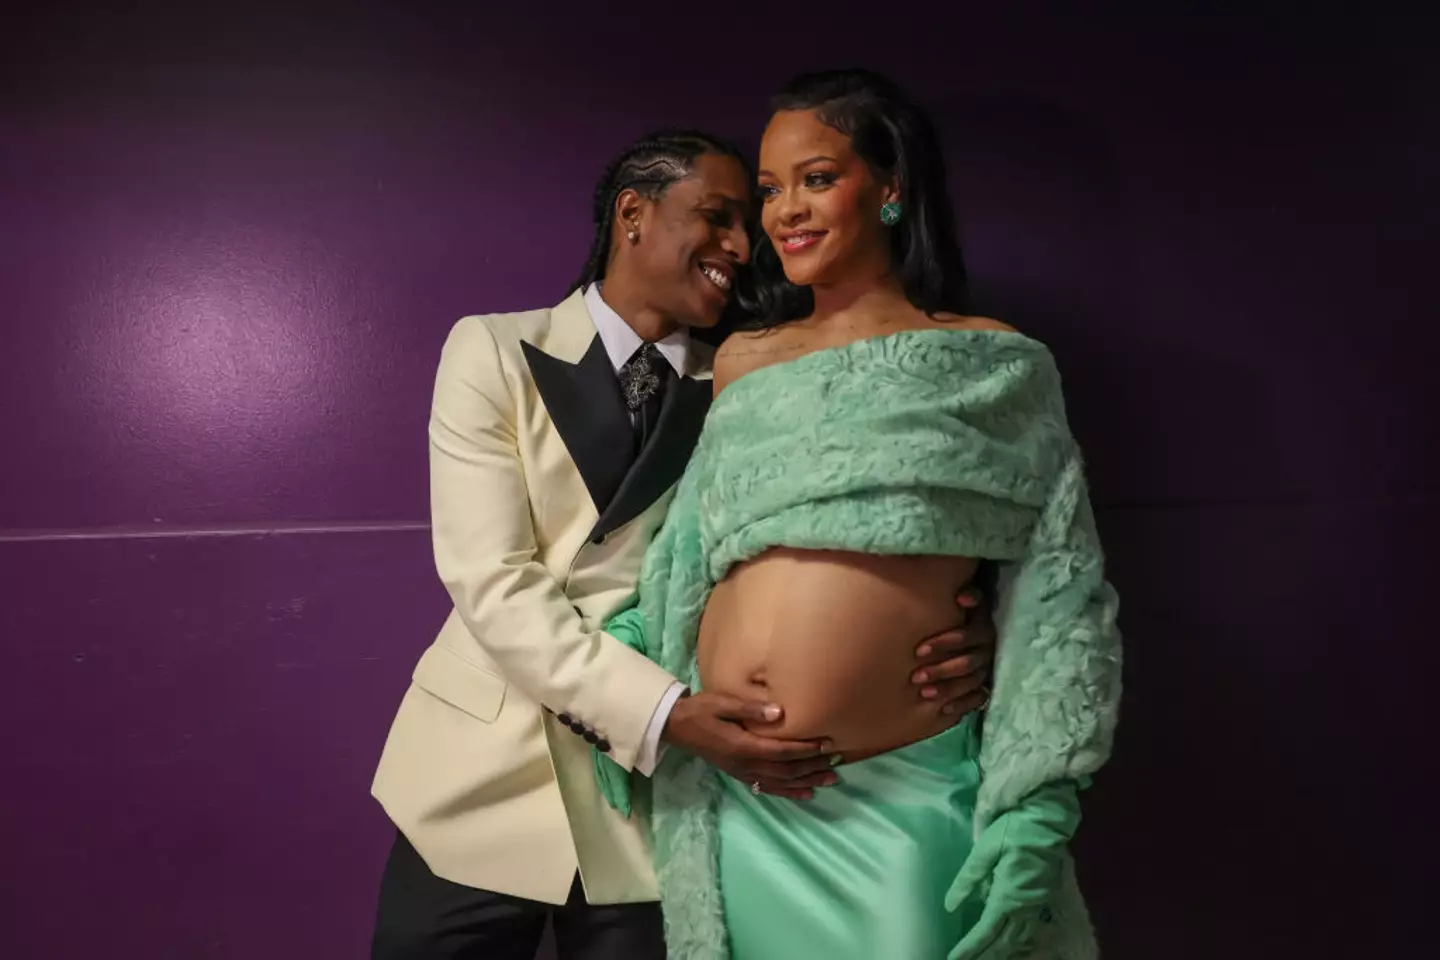 Rihanna's second child's name has been revealed.